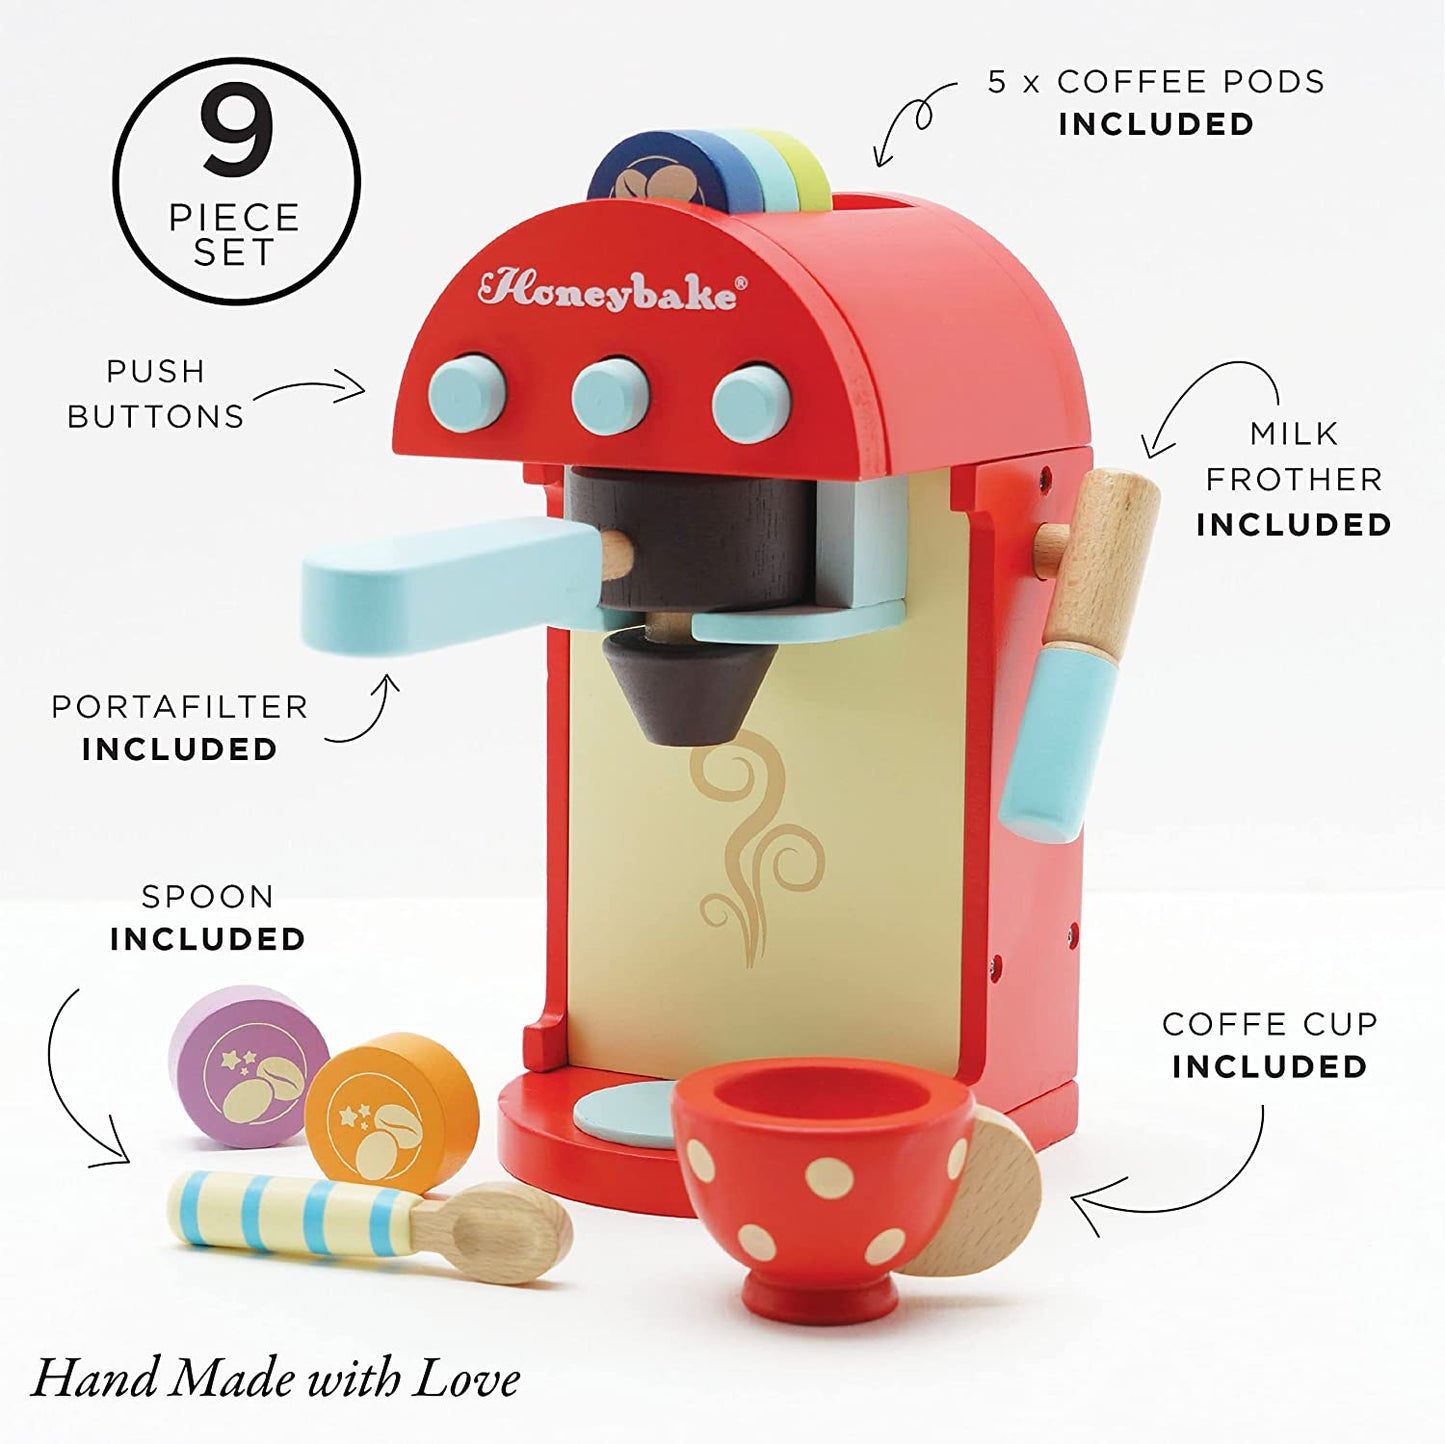 Honeybake Premium Wooden Cafe Machine Set - Pretend Kitchen and Cafe Play Toy Set | Kids Role Play Toy Kitchen Accessories (TV299), Small